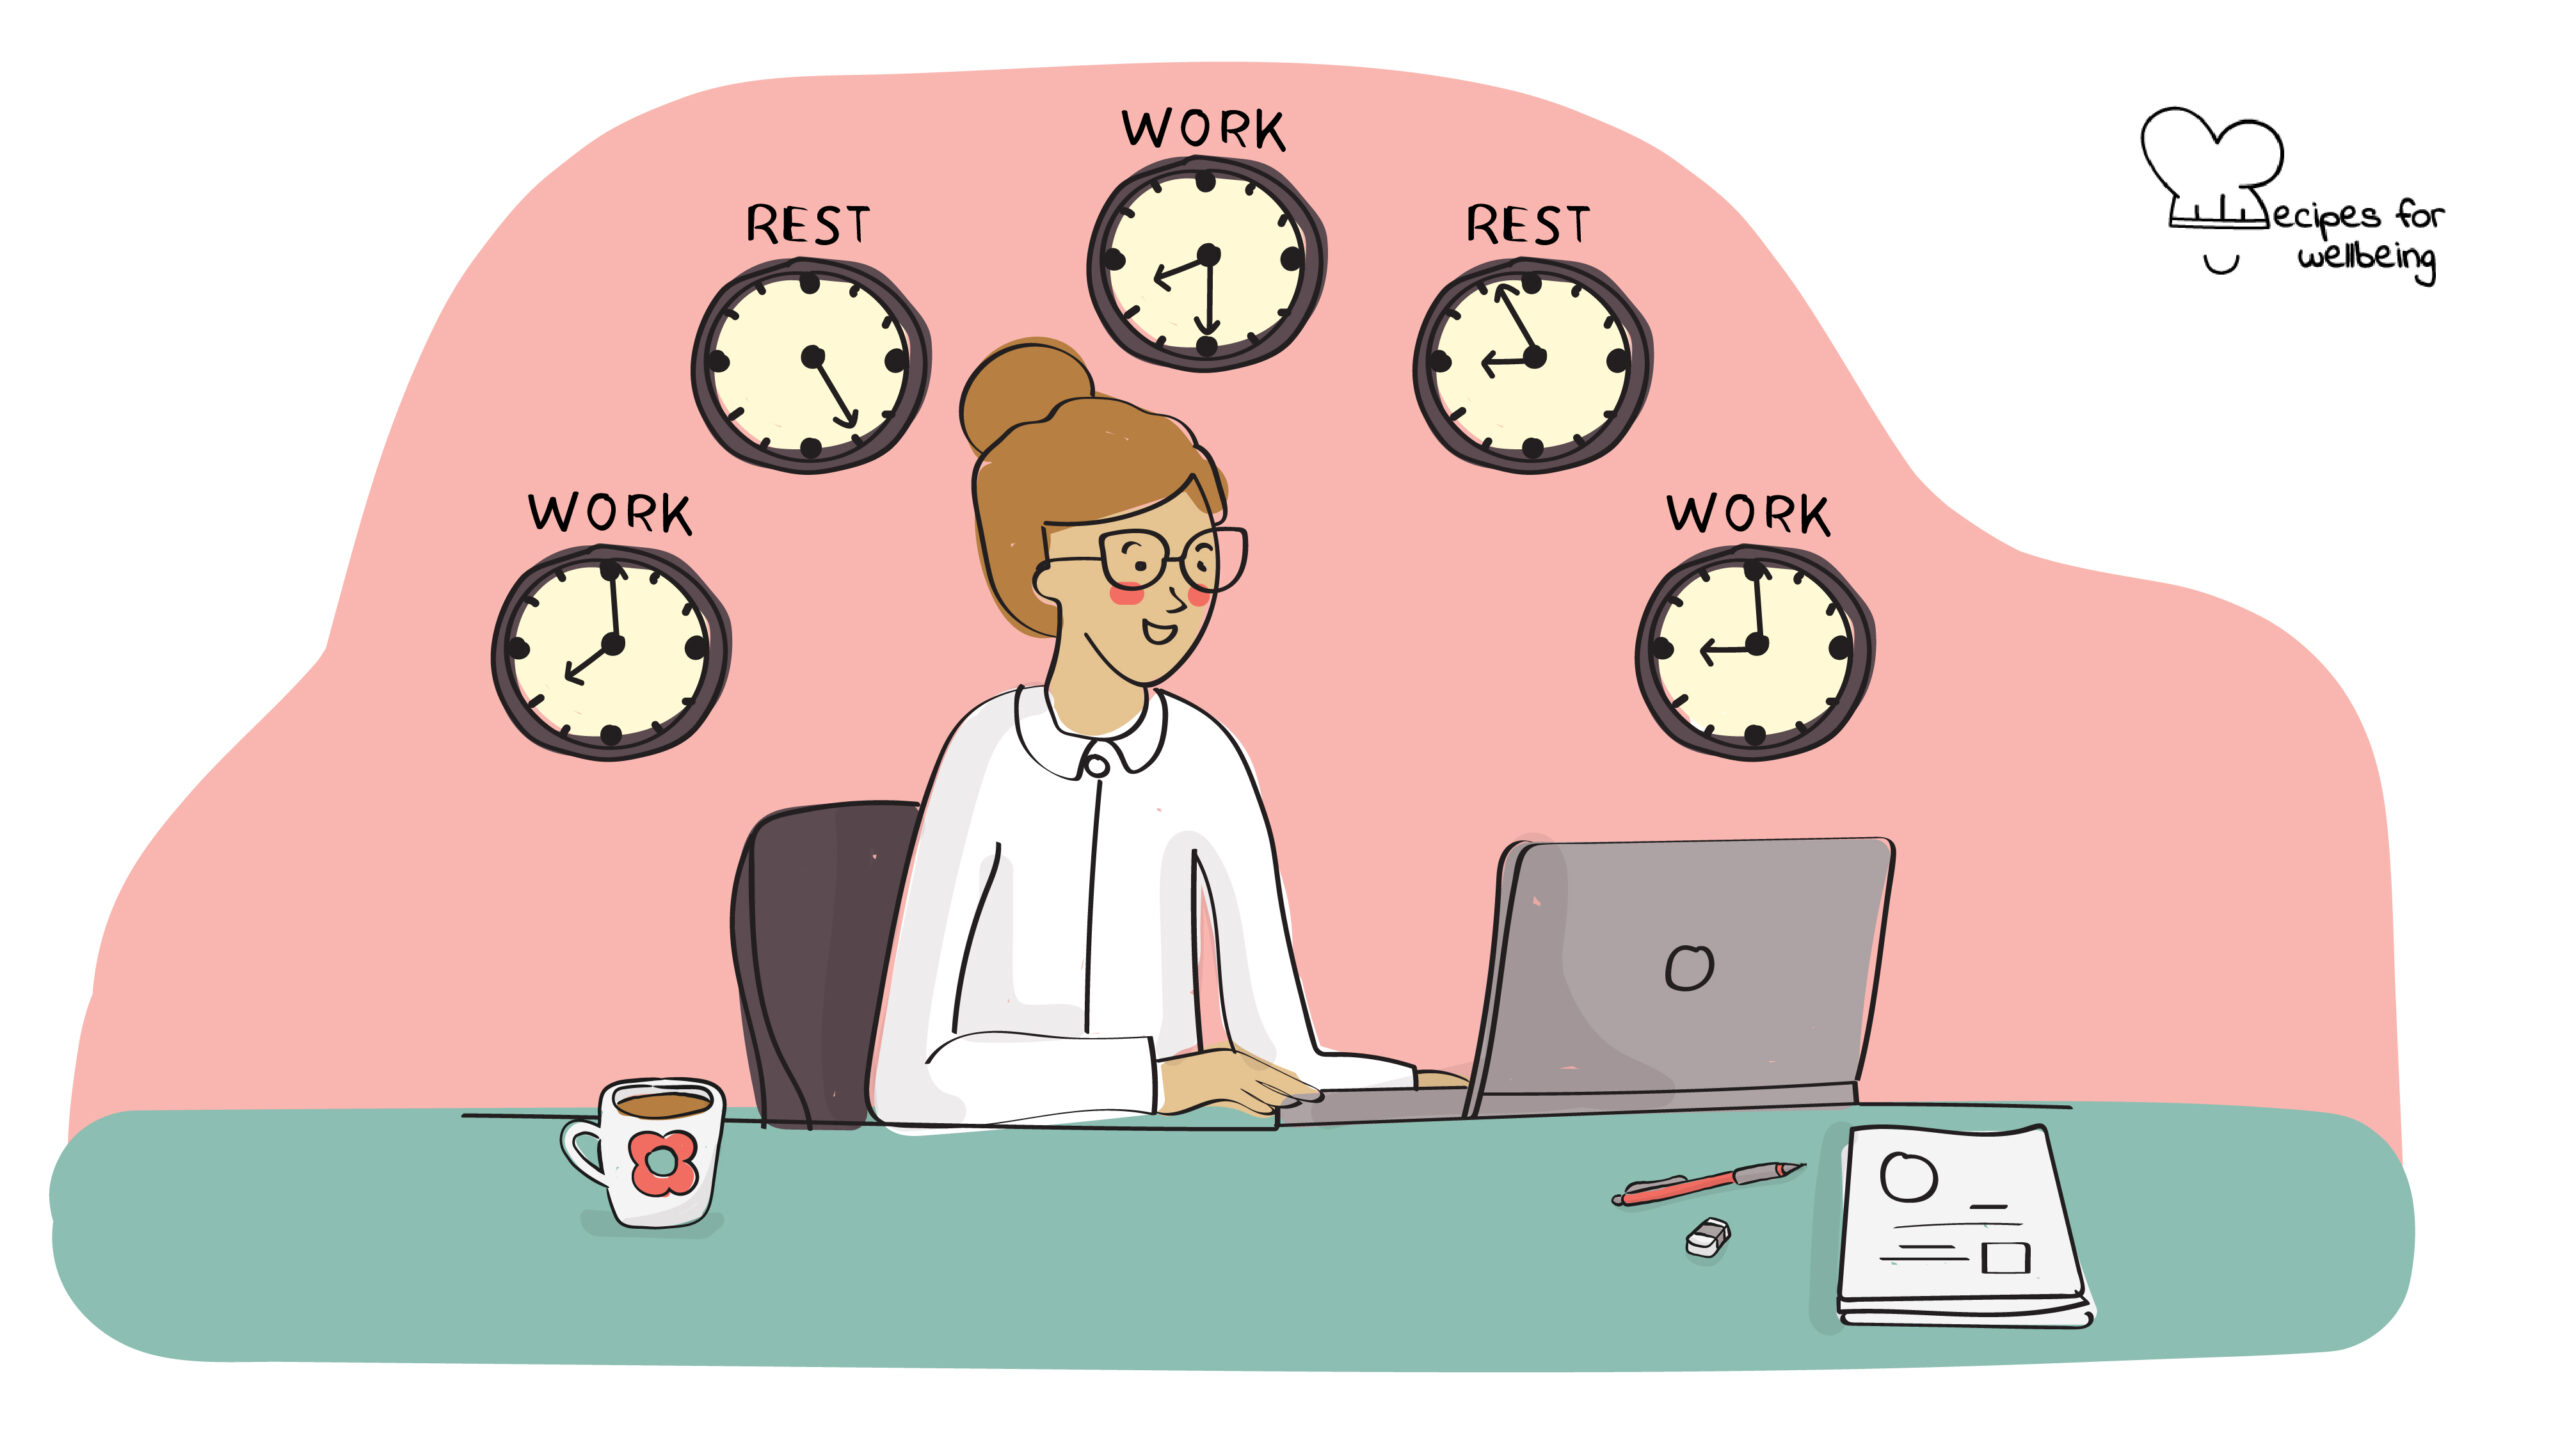 Illustration of a person working behind a laptop and 5 clocks indicating either "work" or "rest" times. © Recipes for Wellbeing